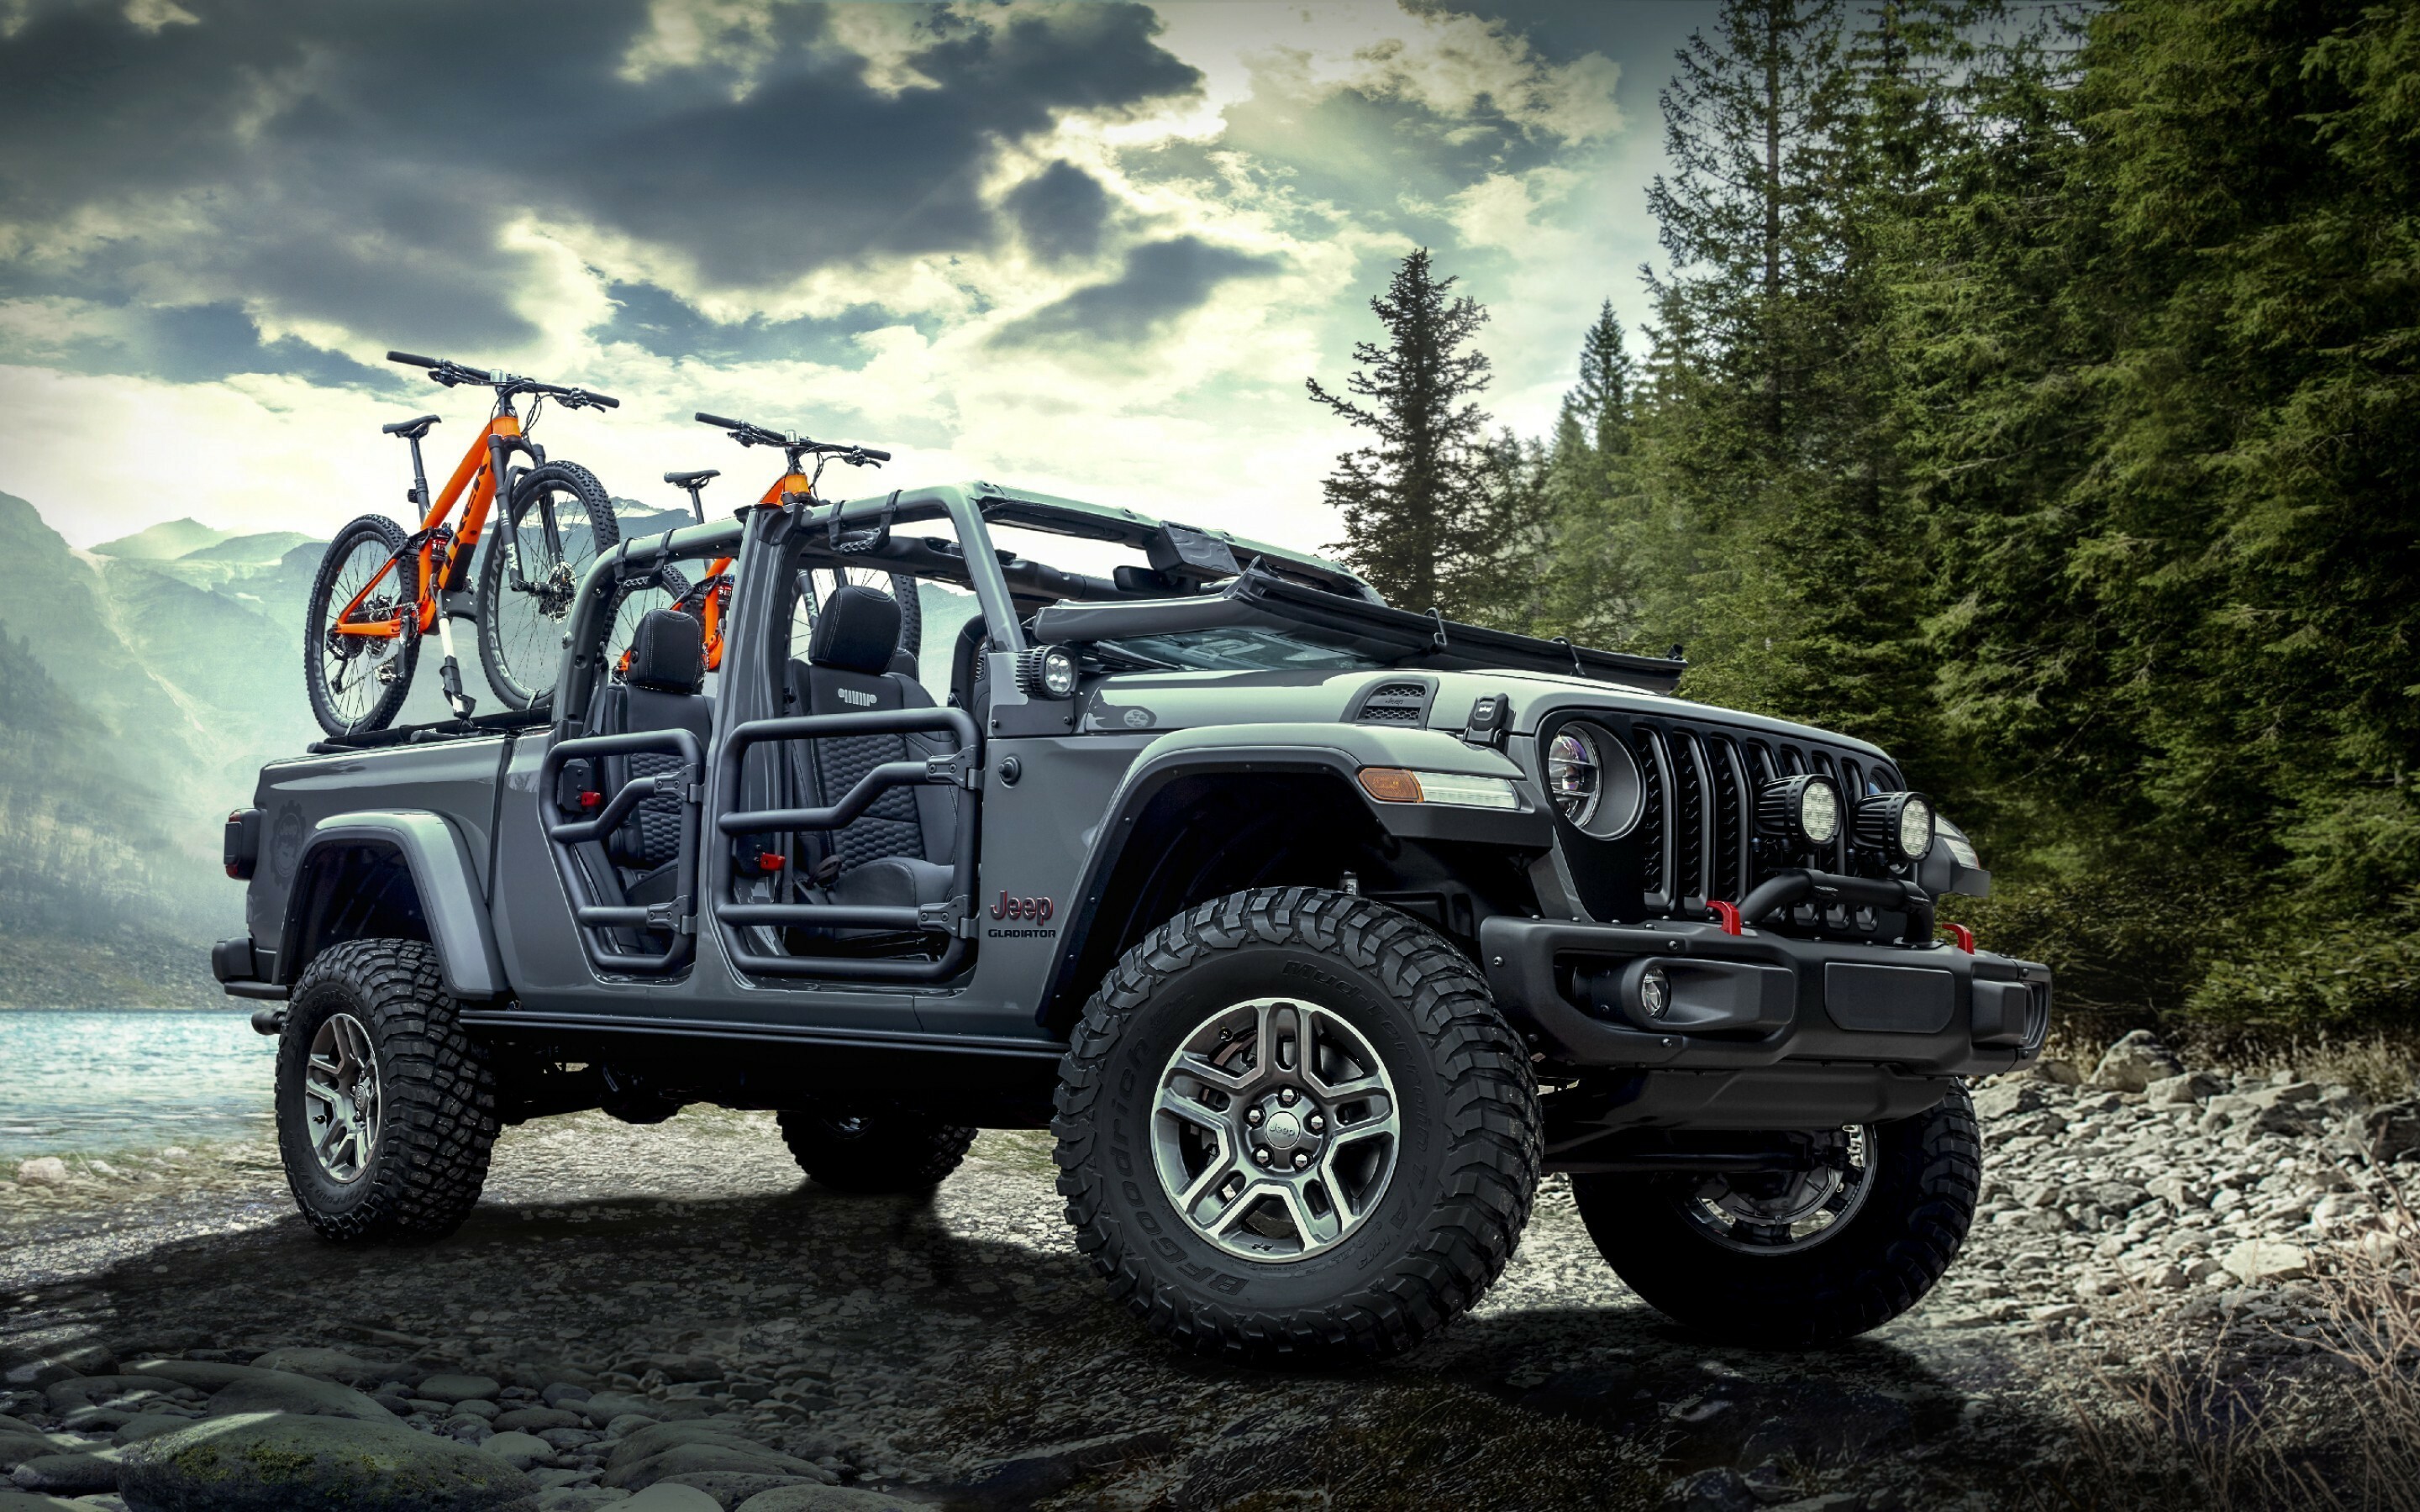 Jeep: Gladiator, A mid-size crew-cab pickup truck with room for up to five people. 2880x1800 HD Wallpaper.